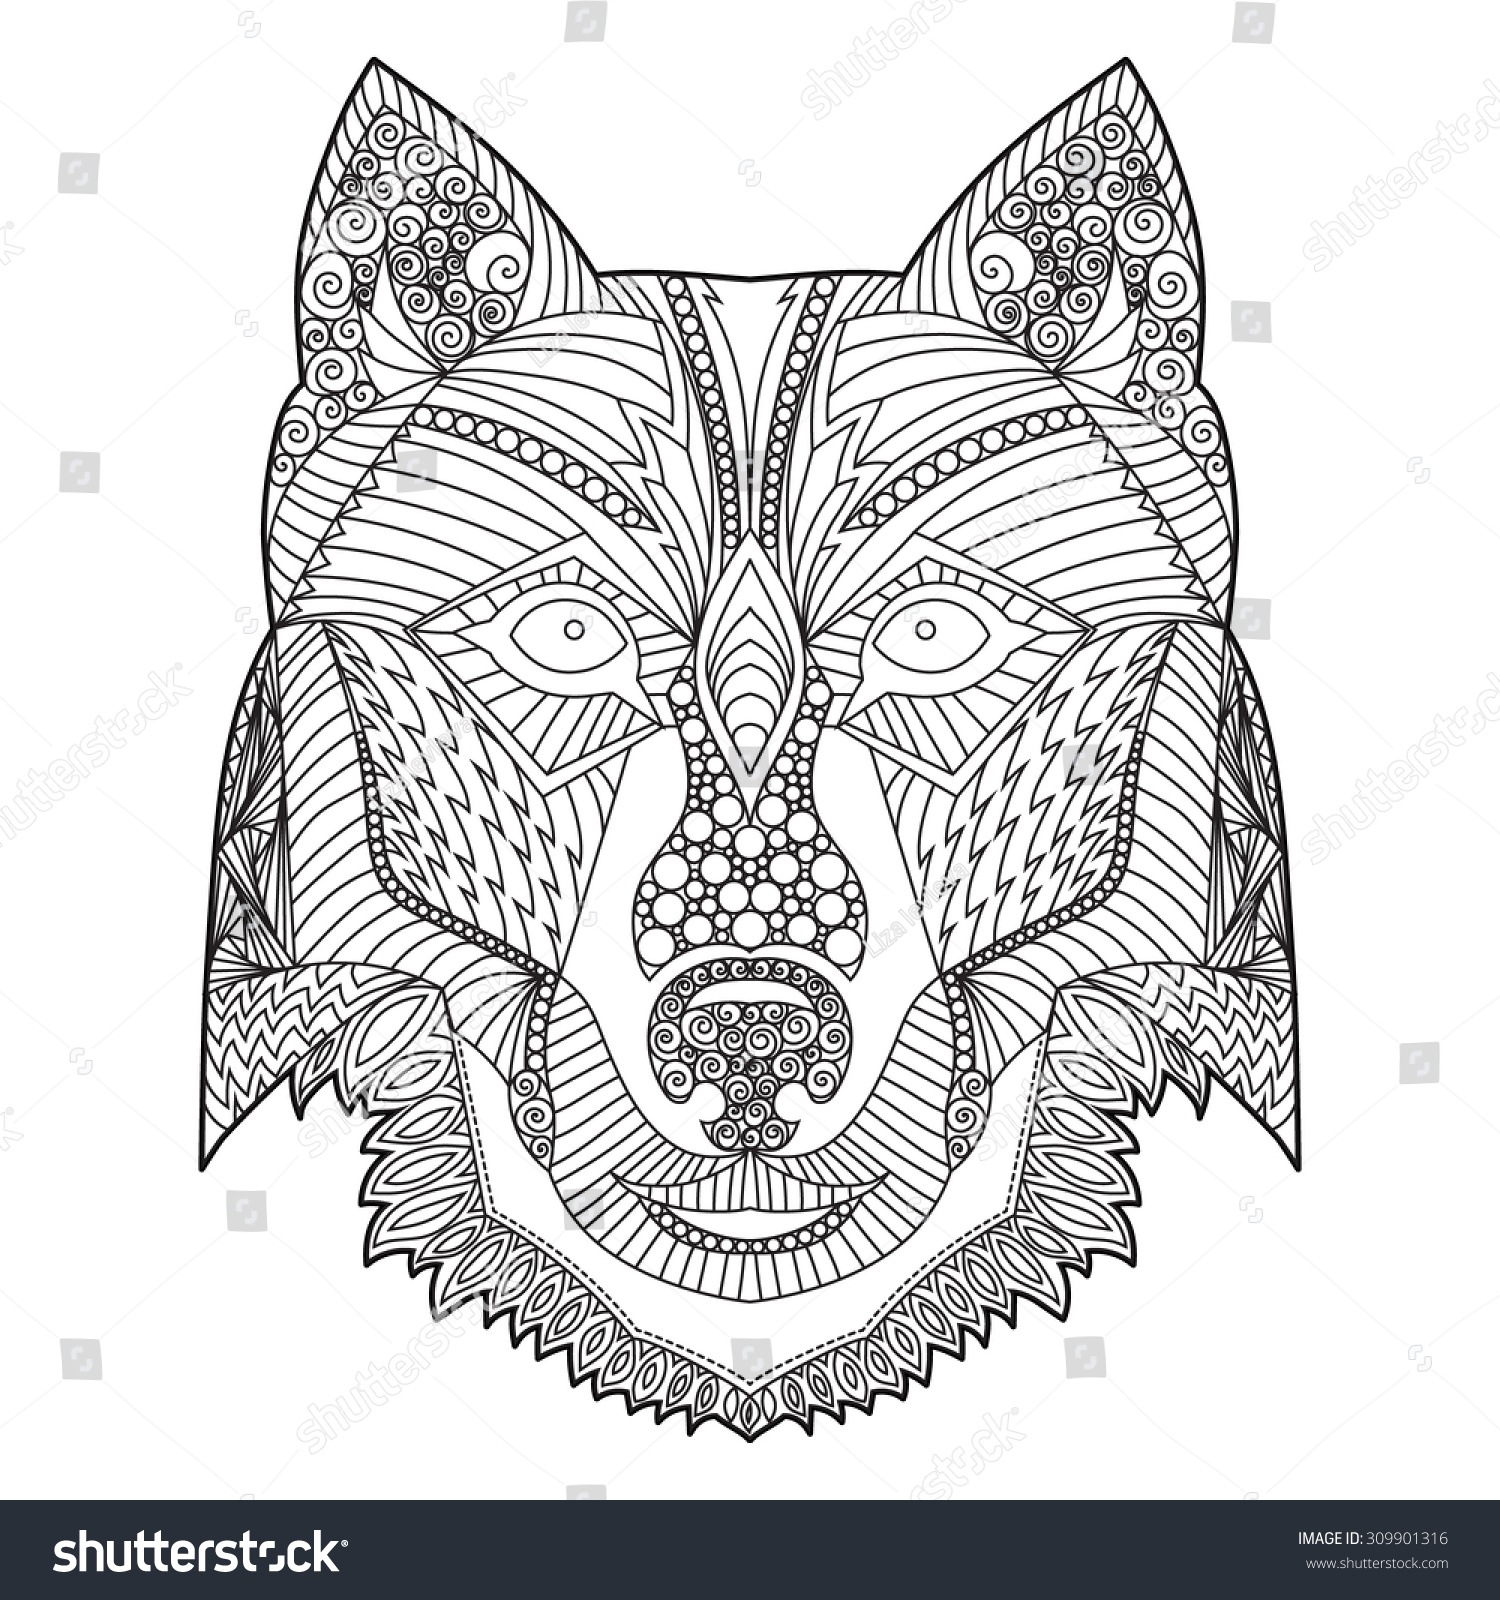 SVG of Coloring Book Page with Hand Drawn Zentangle Ethnic Style Wolf Head svg